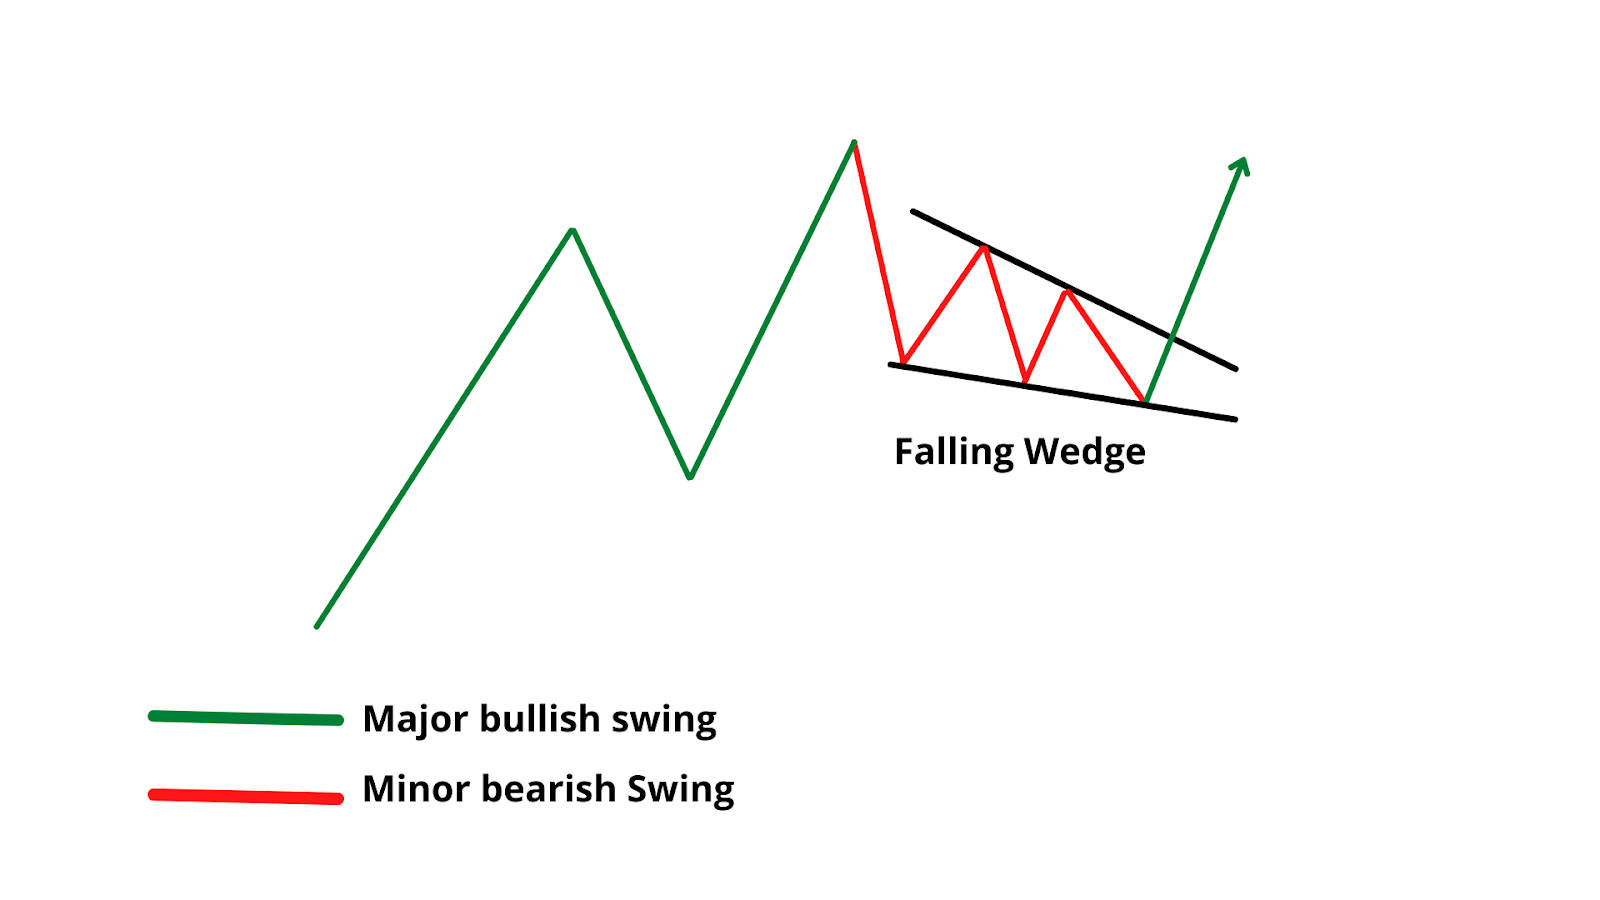 Falling Wedge Continuation Patterns